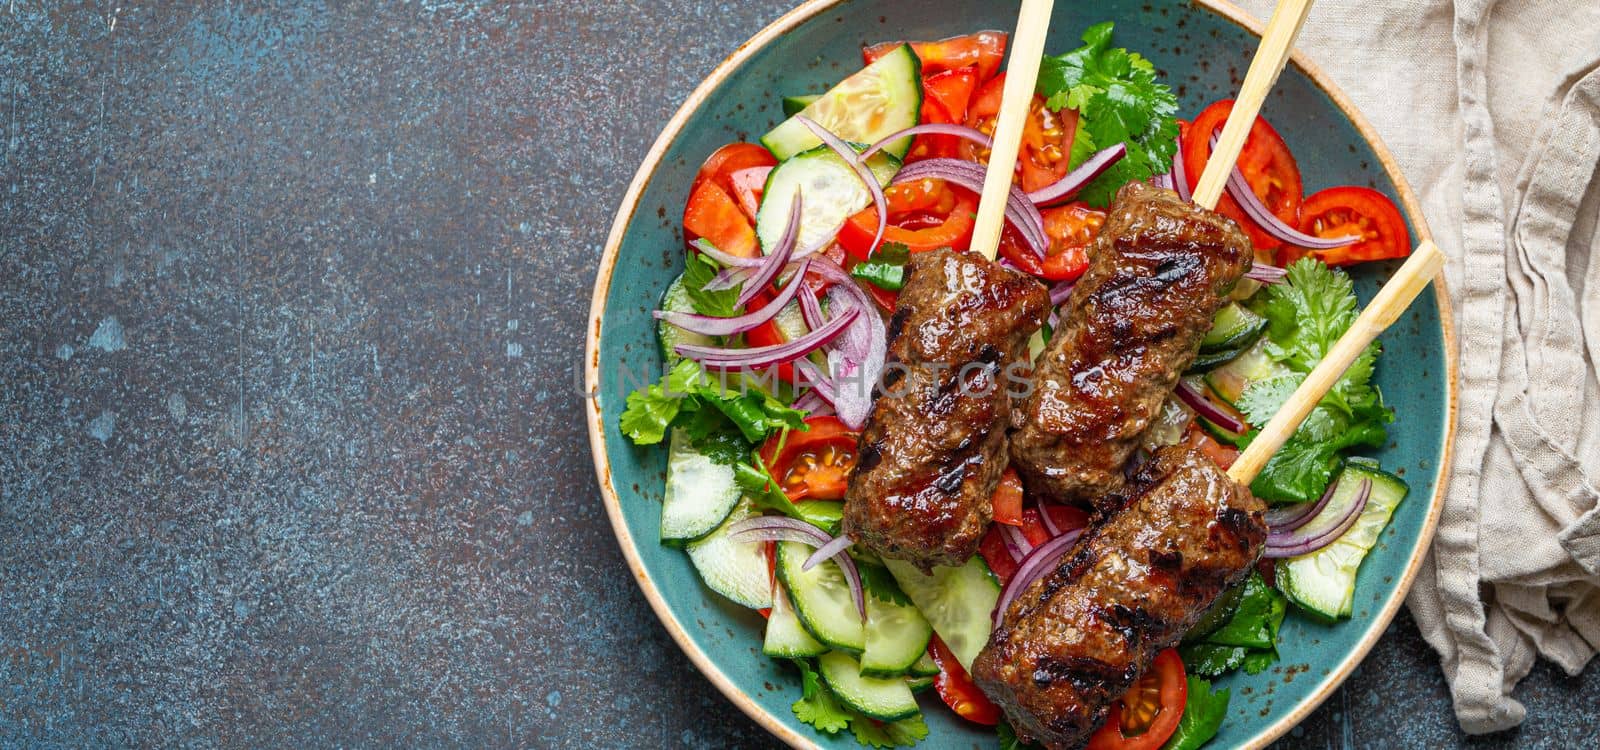 Grilled skewer meat beef kebabs on sticks served with fresh vegetables salad on plate on rustic concrete background from above. Traditional Middle Eastern Turkish dish Kebab, space for text by its_al_dente